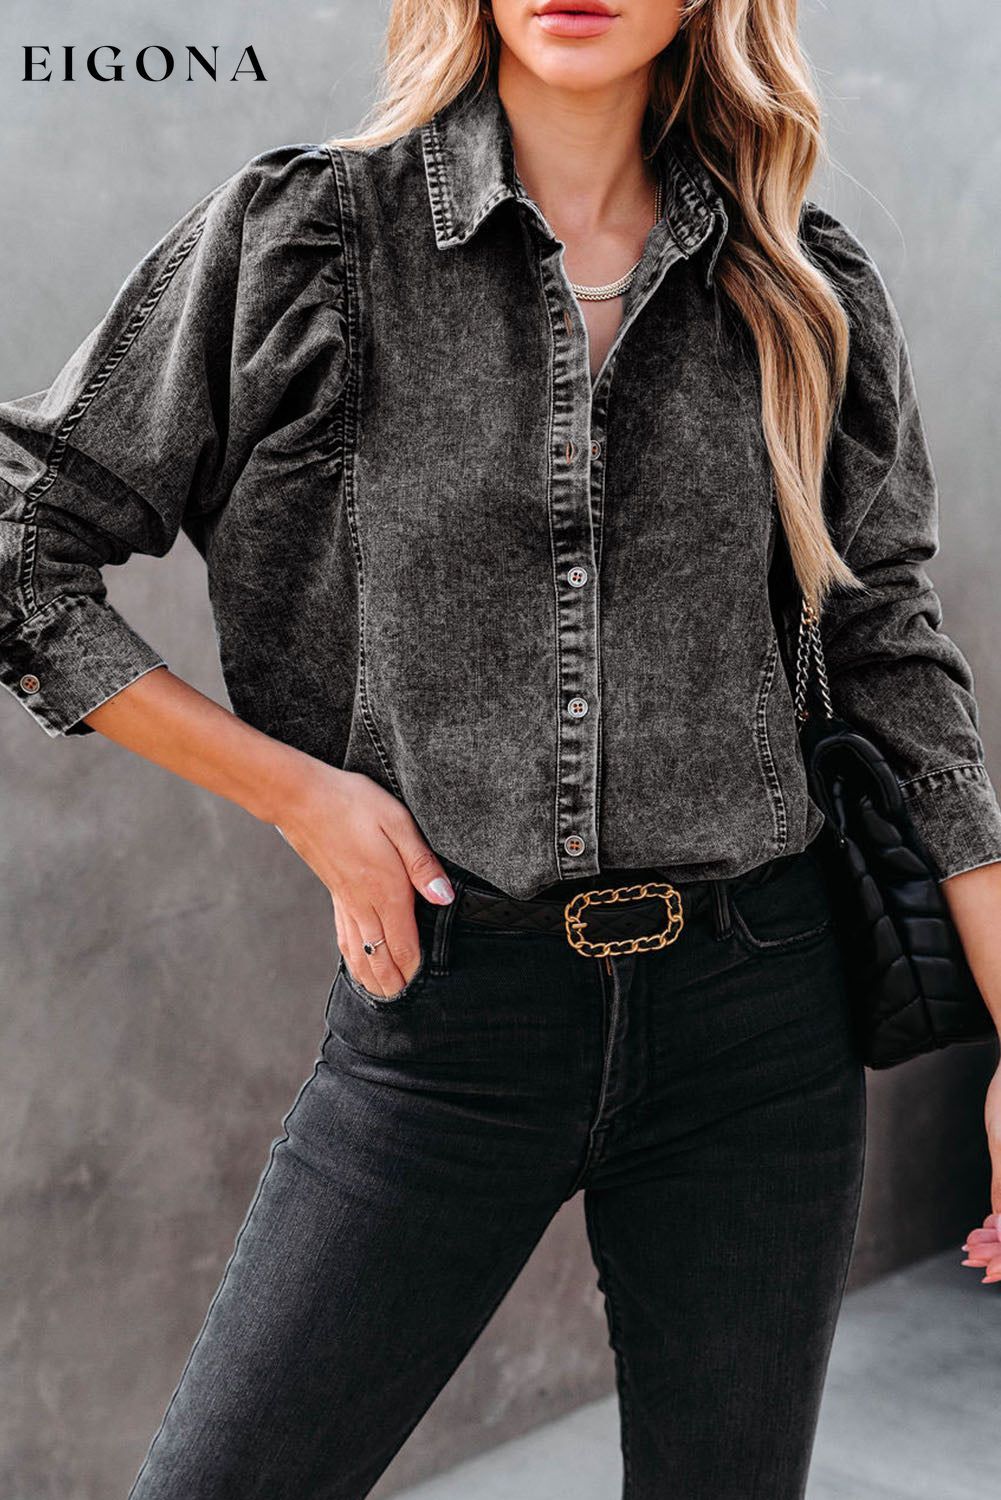 Black Puff Sleeve Button-Up Denim Jacket Black 82%Cotton+10%Polyester+8%Viscose clothes Fabric Denim long sleeve shirt long sleeve shirts long sleeve top long sleeve tops Occasion Daily Print Solid Color Season Fall & Autumn shirt shirts Style Elegant top tops